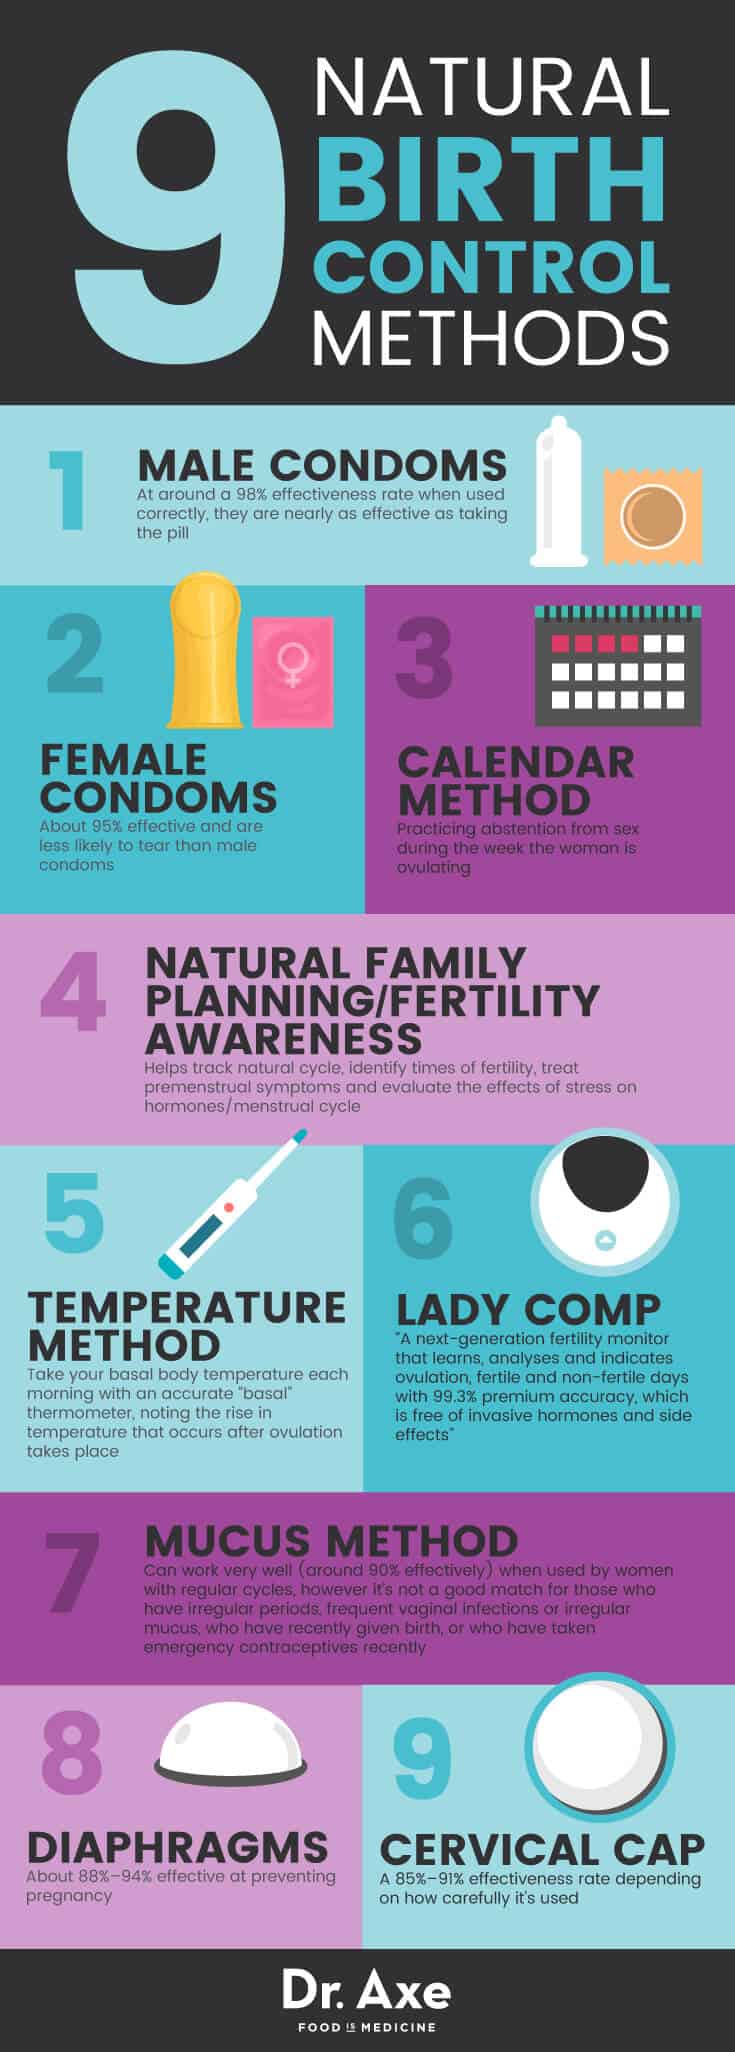 Natural birth control methods - Dr. Axe